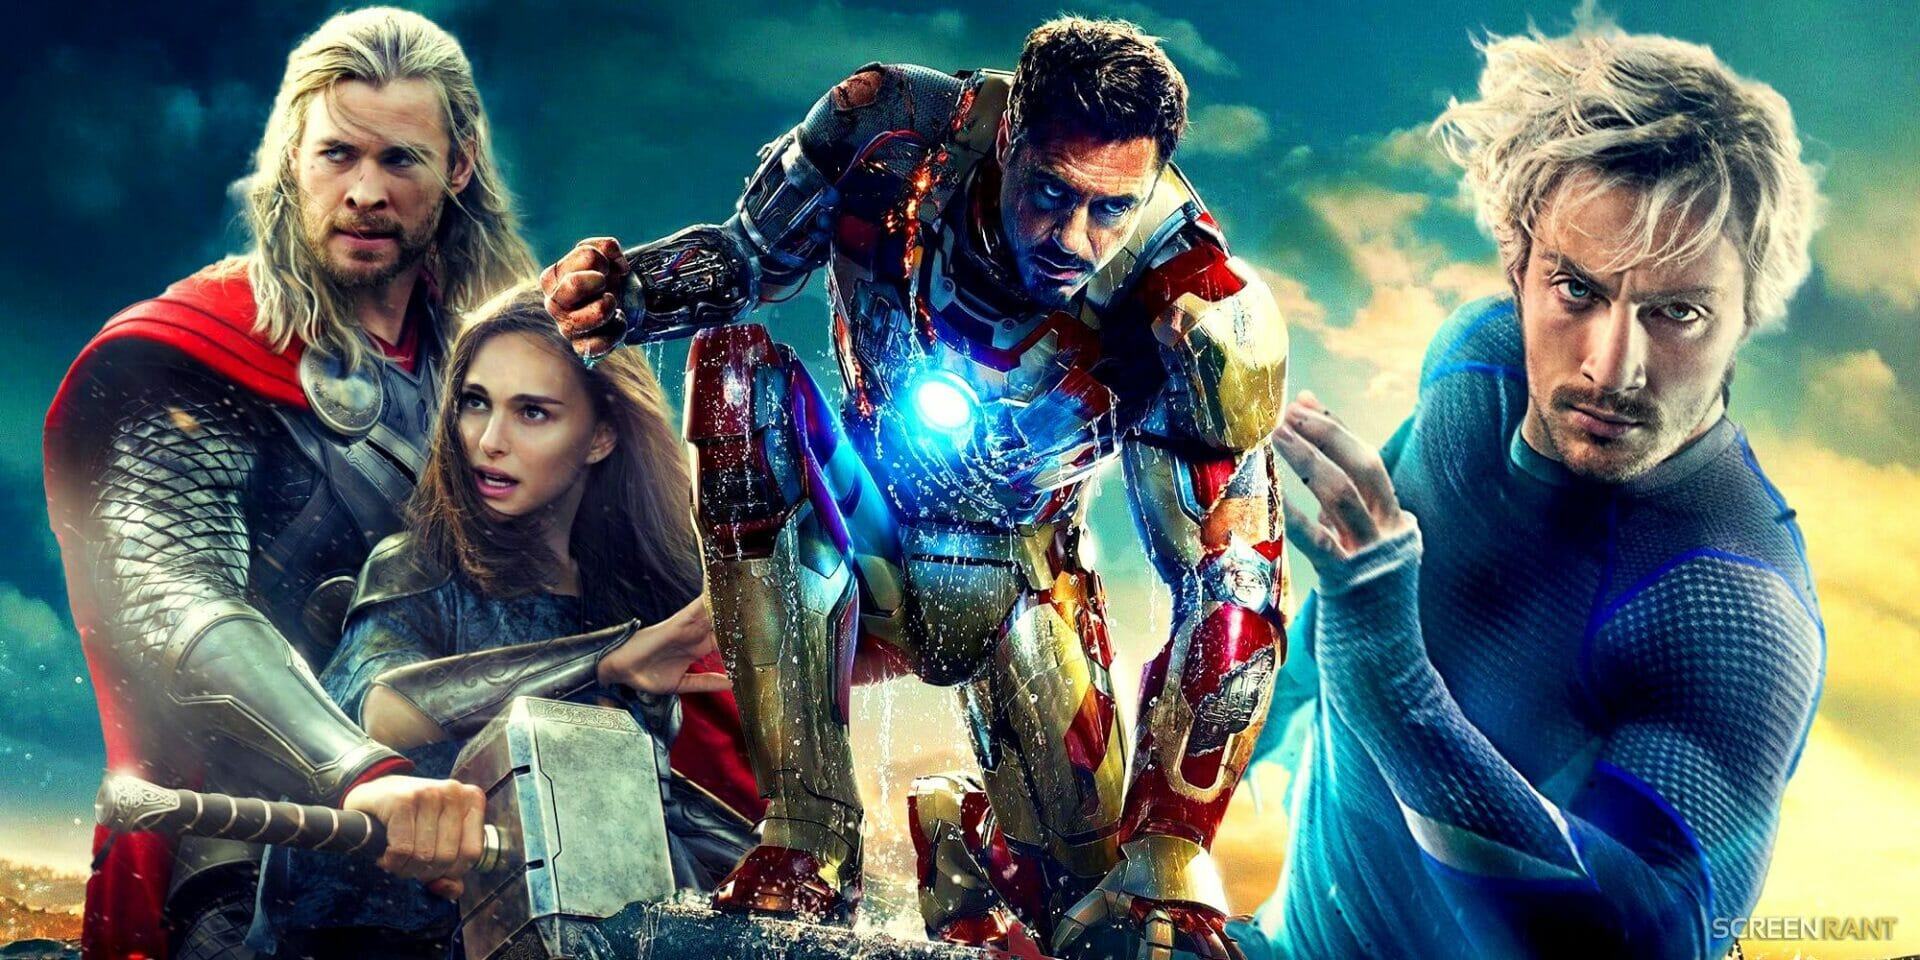 Custom image of MCU Phase 2 movies showing Thor and Jane Foster, Iron Man, and Quicksilver.